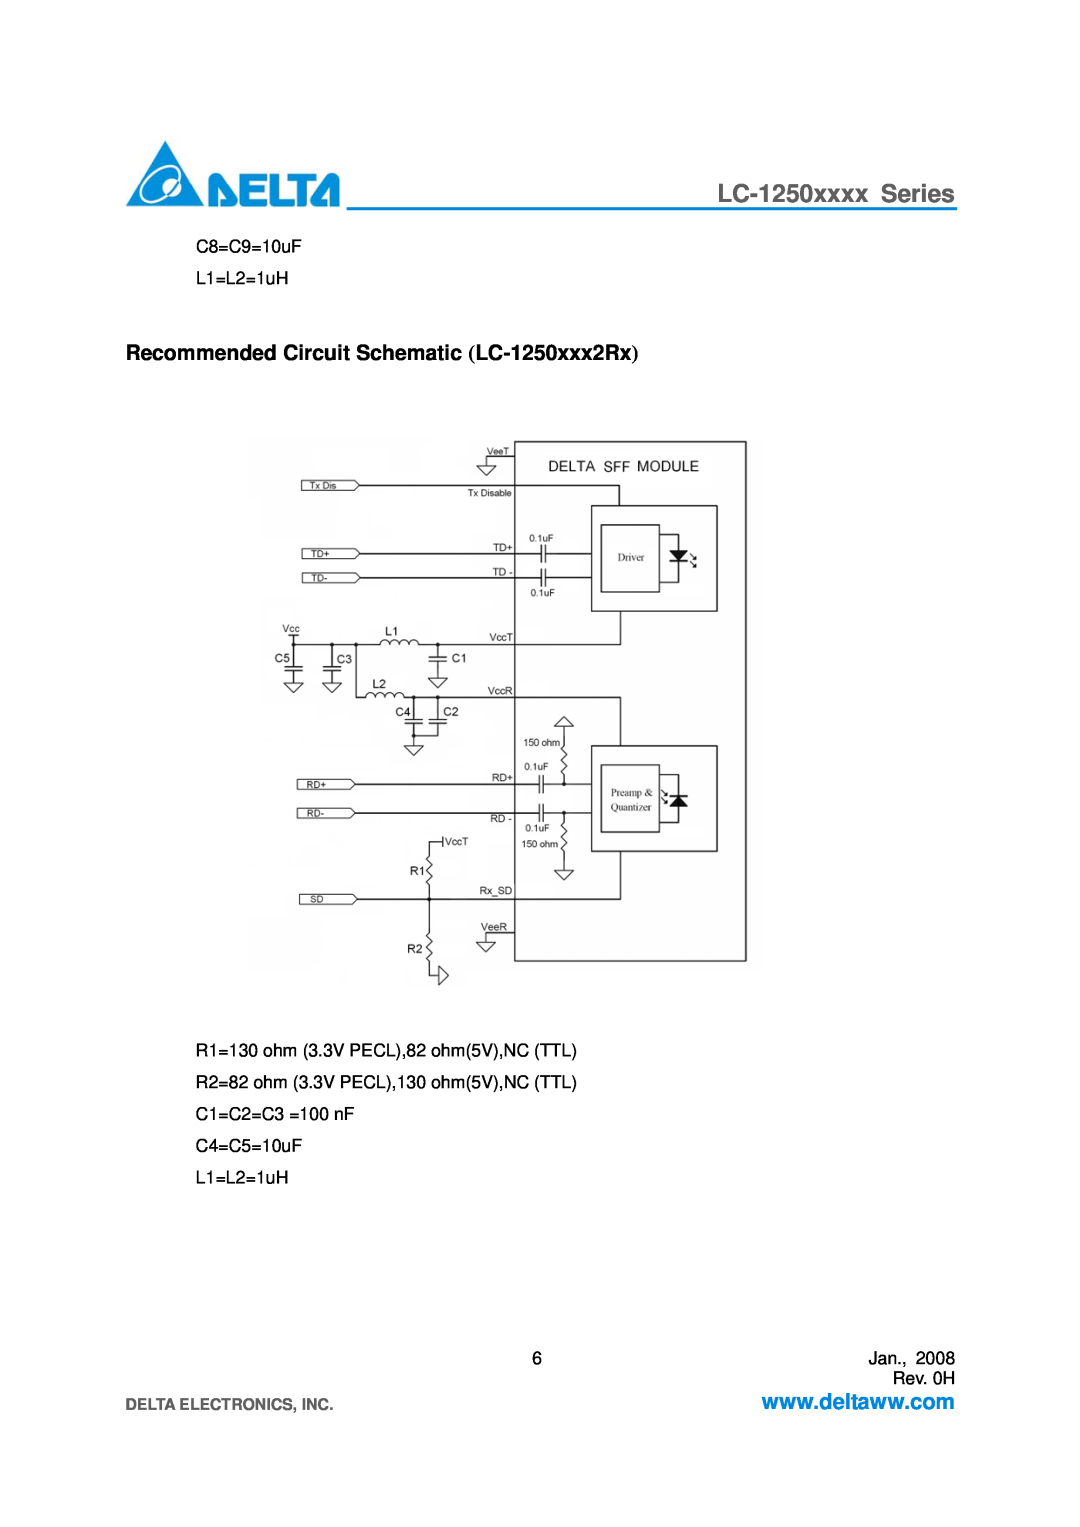 Delta Electronics LC-1250xxxx Series specifications Recommended Circuit Schematic LC-1250xxx2Rx, Delta Electronics, Inc 